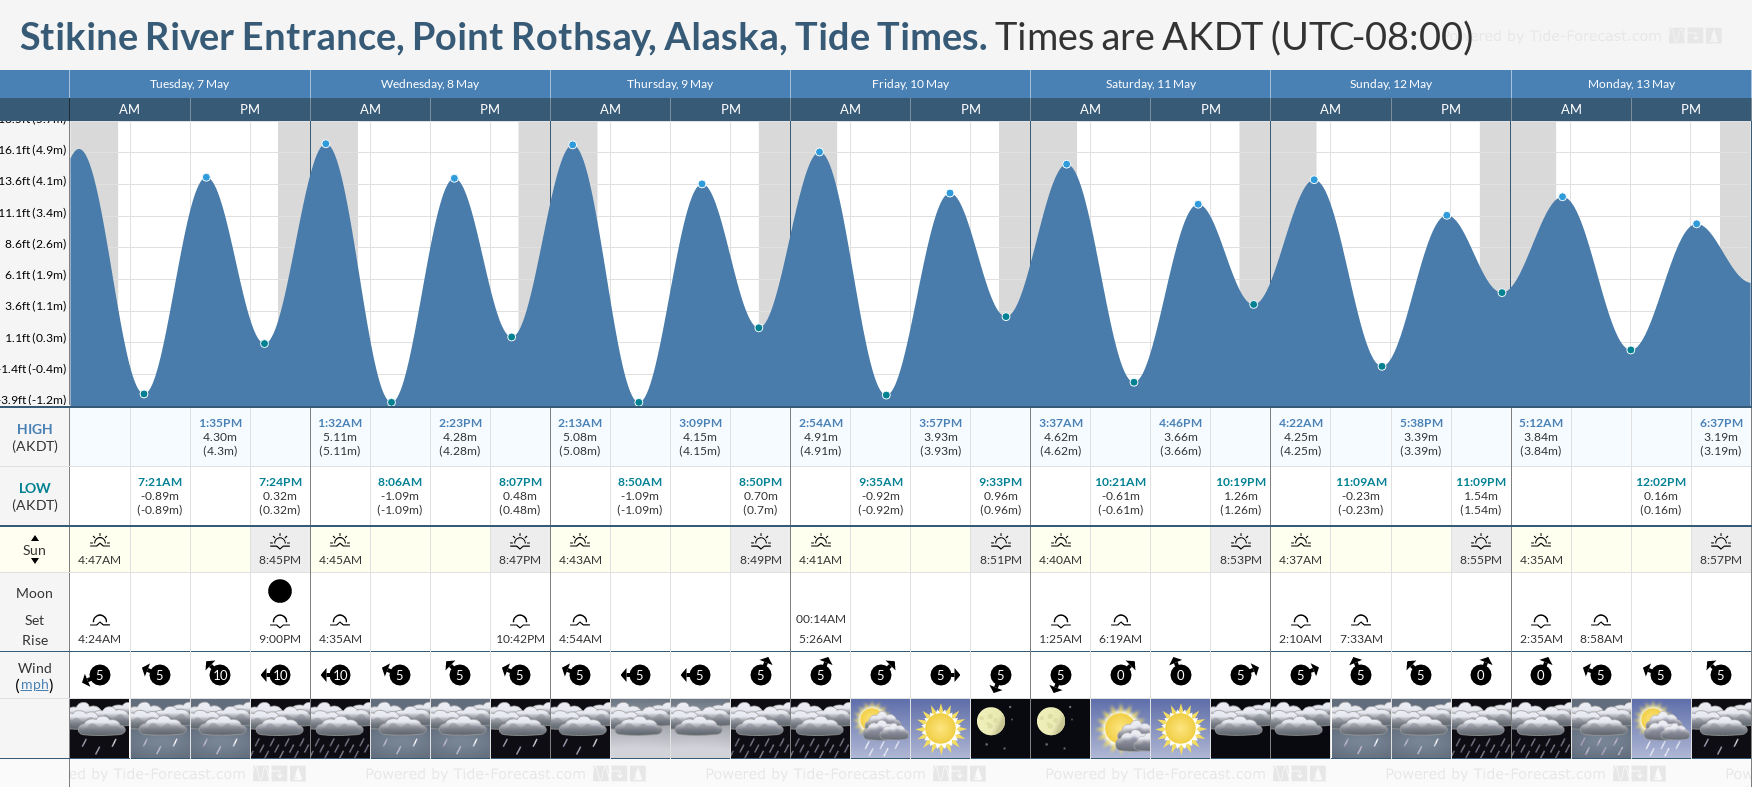 Stikine River Entrance, Point Rothsay, Alaska Tide Chart including high and low tide tide times for the next 7 days